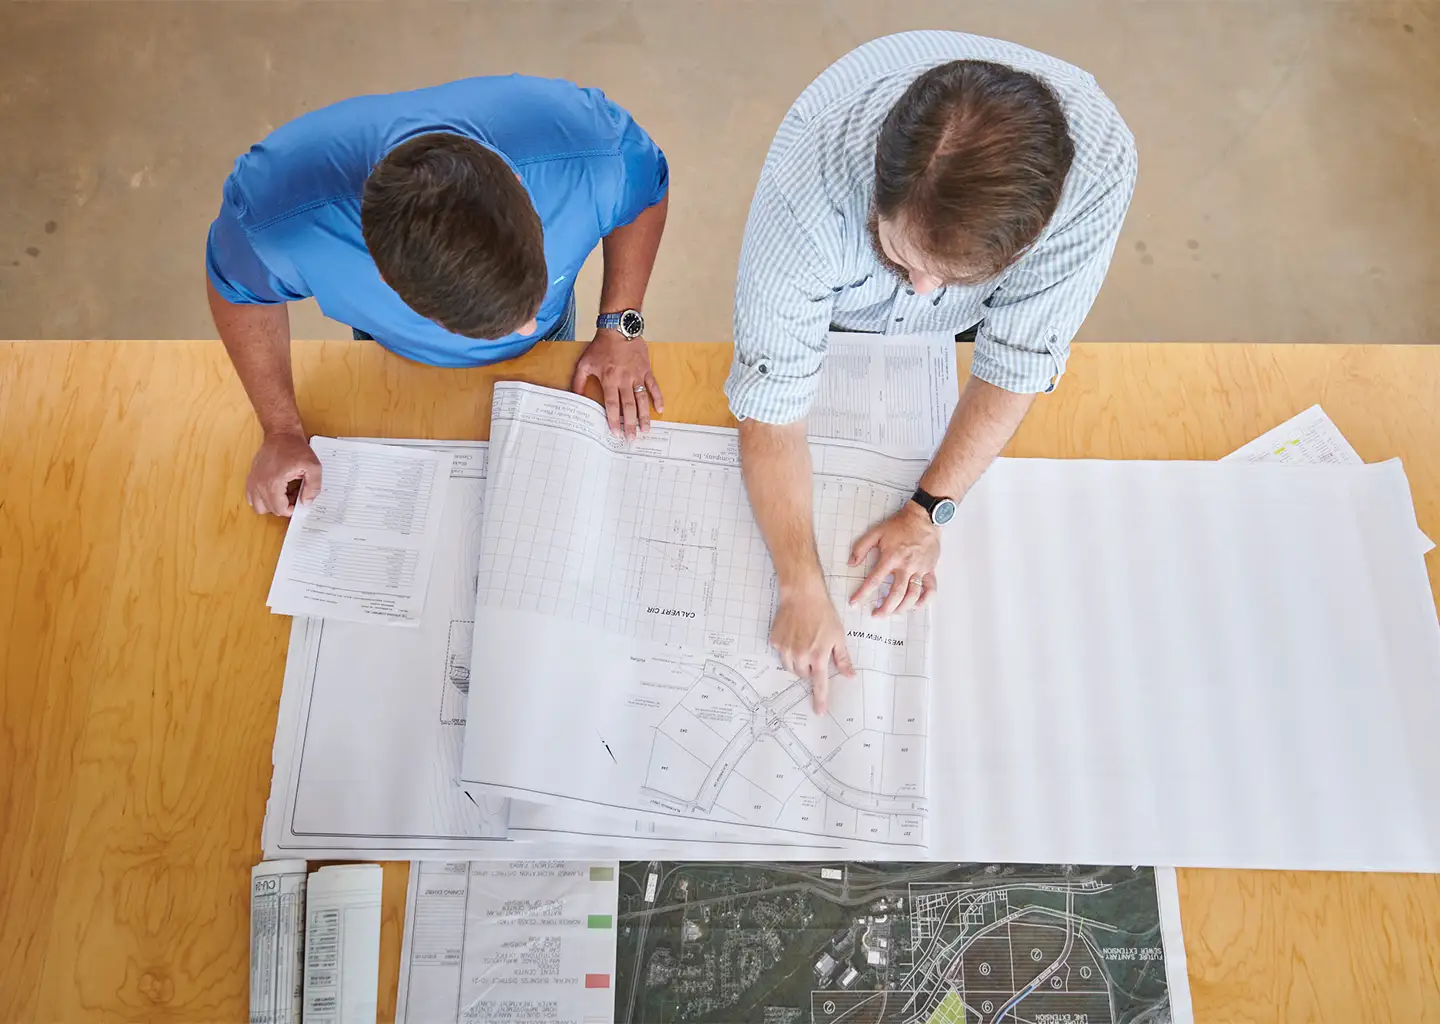 2 architects pointing at plans on a desk